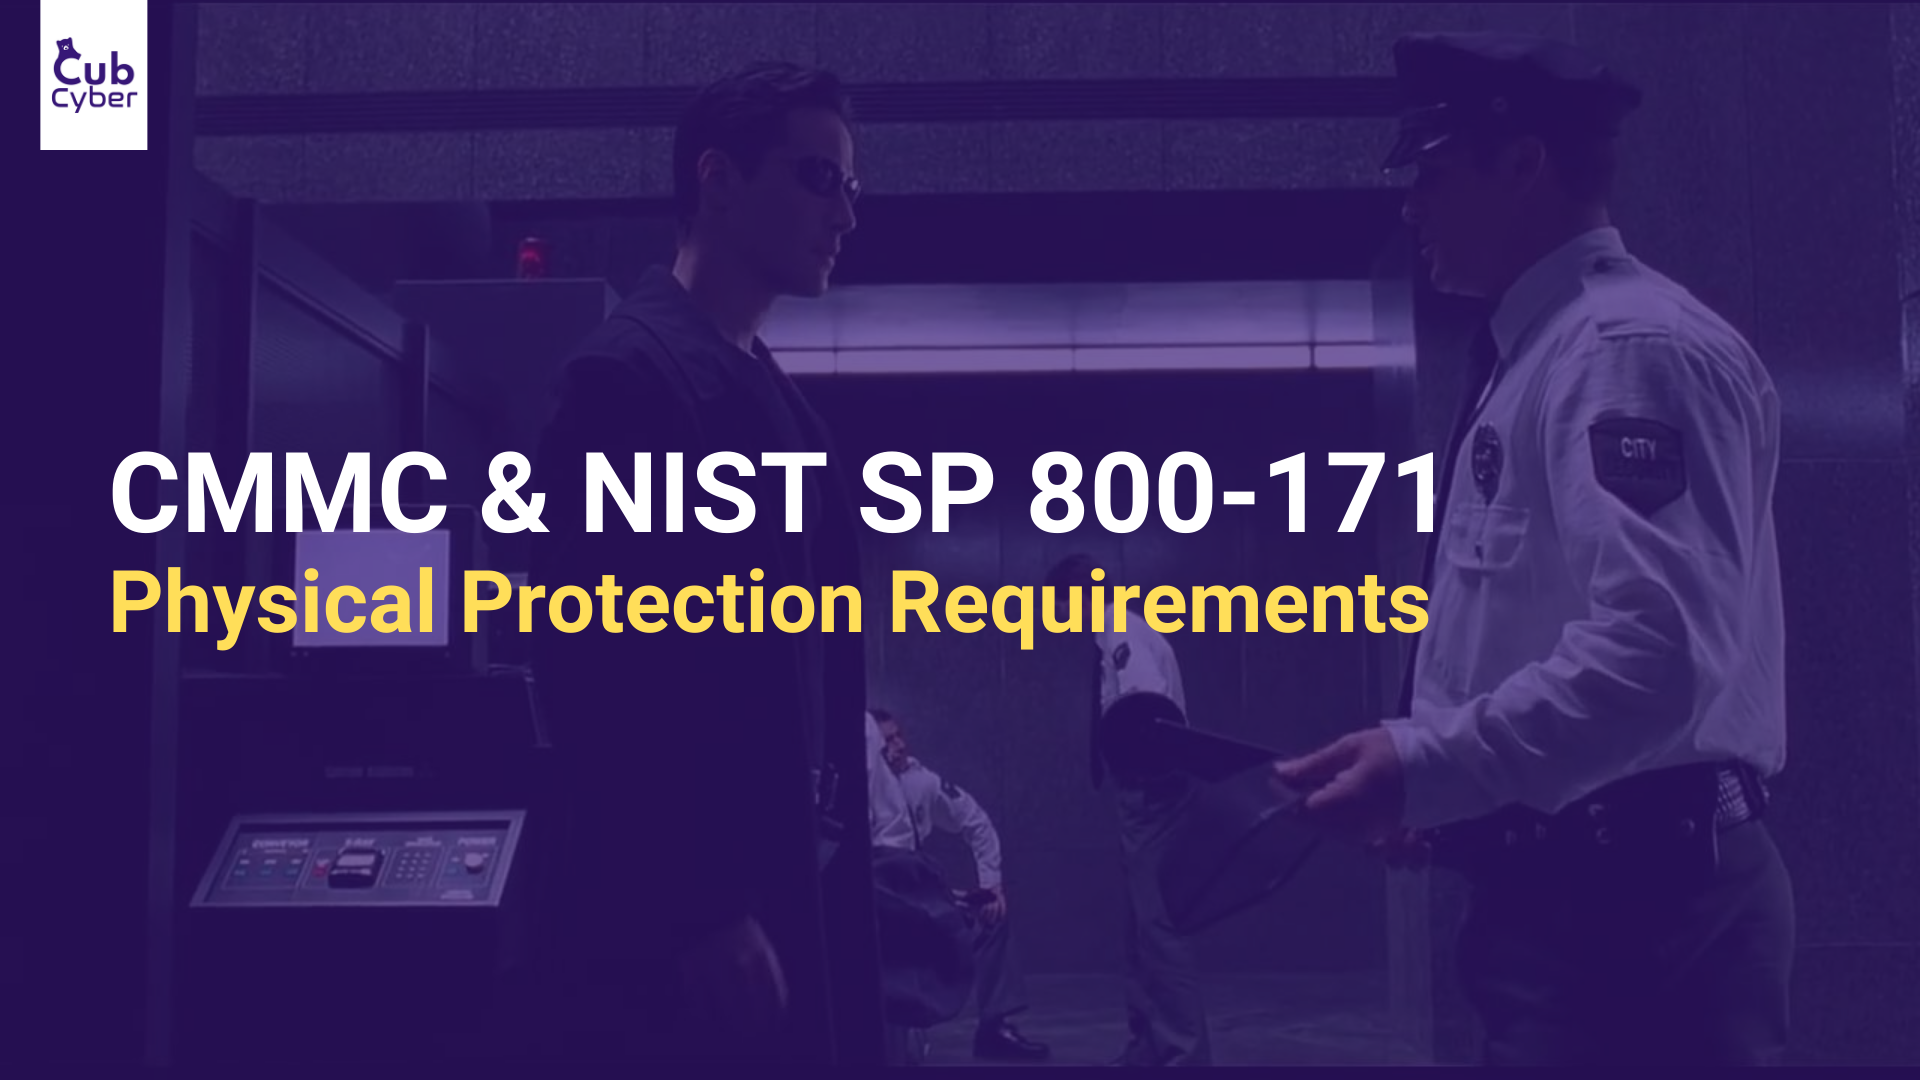 CMMC and NIST SP 800-171 Physical Protection